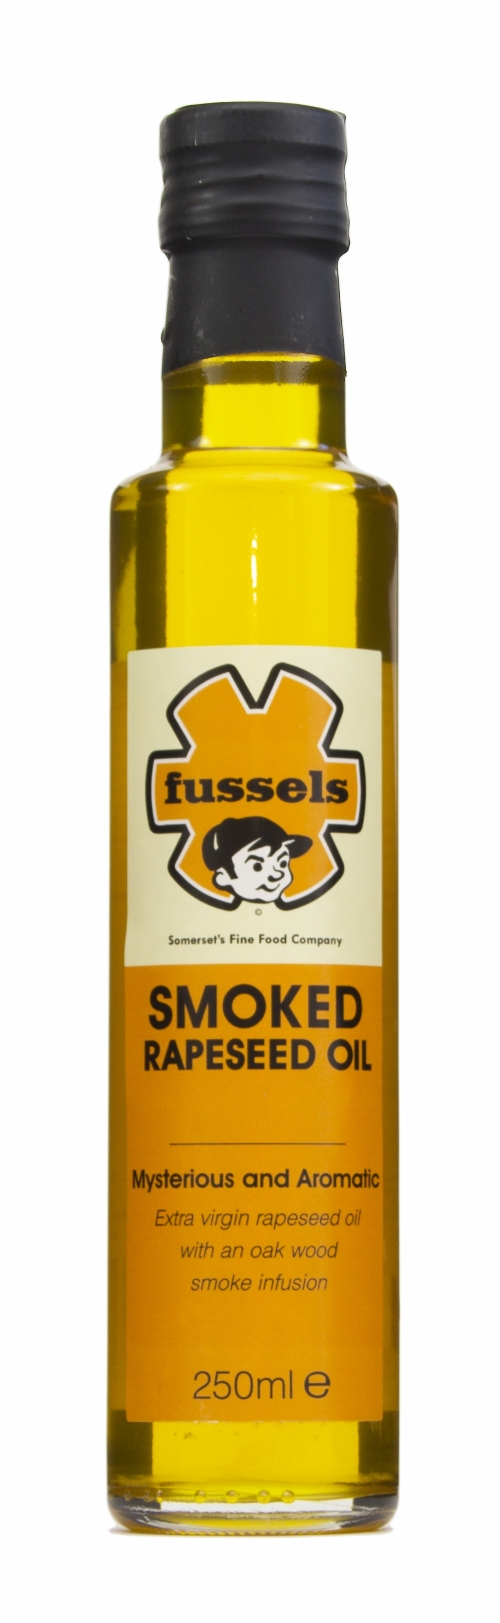 FUSSELS Smoked Rapeseed Oil 250ml